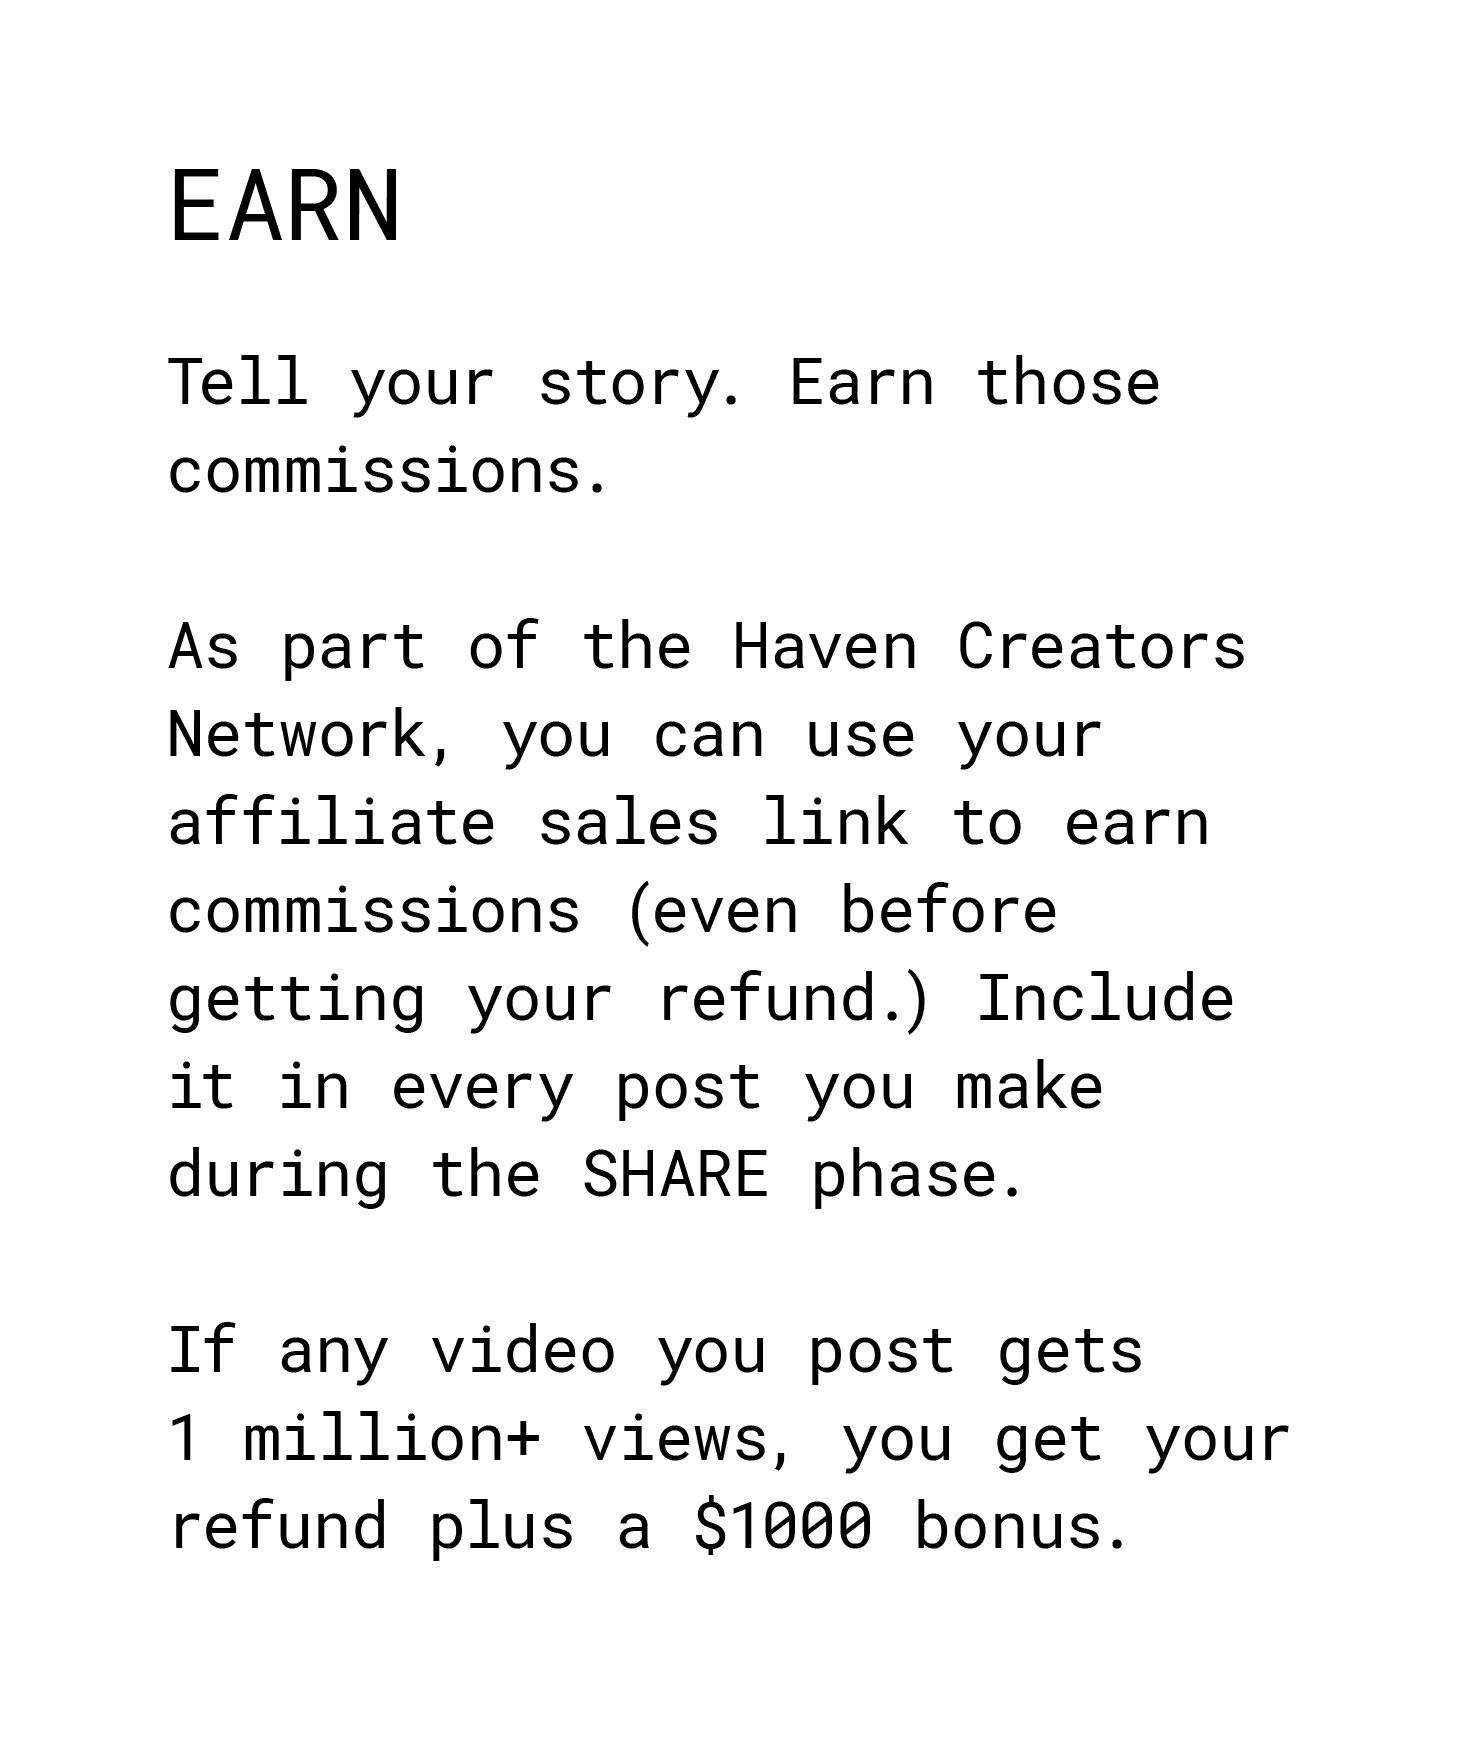 Earn. Tell your story. Earn those commissions. As part of the Haven Creators Network, you can use your affiliate sales link to earn commissions (even before getting your refund.) Include it in every post you make during the SHARE phase. If any video you post gets 1 million+ views, you get your refund plus a $1000 bonus.